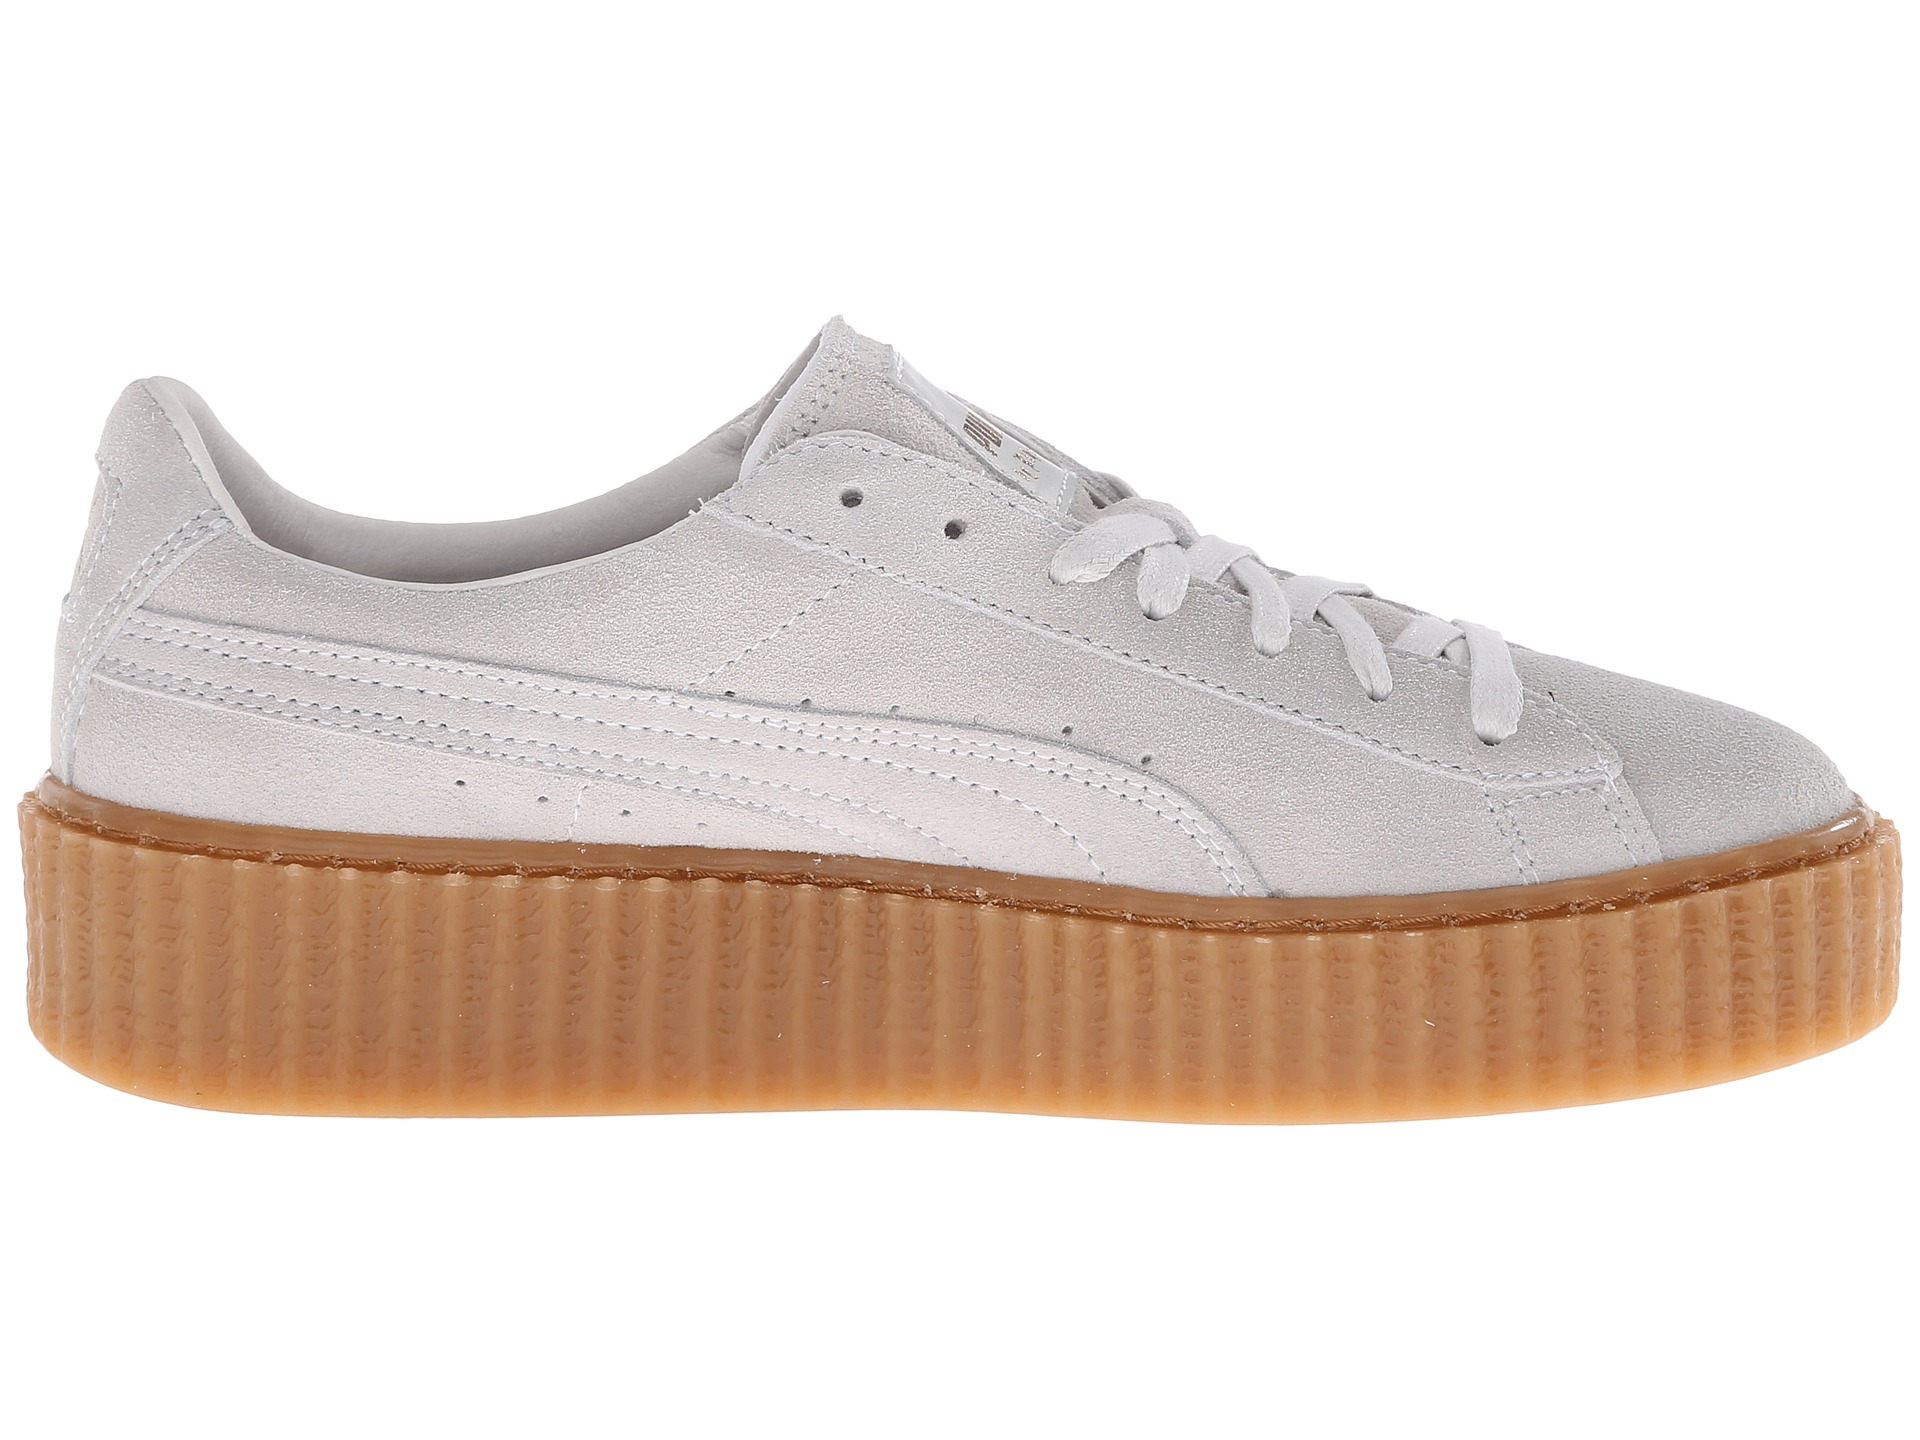 Tegenslag Herhaald Antecedent PUMA Rihanna X Suede Creepers in White | Lyst